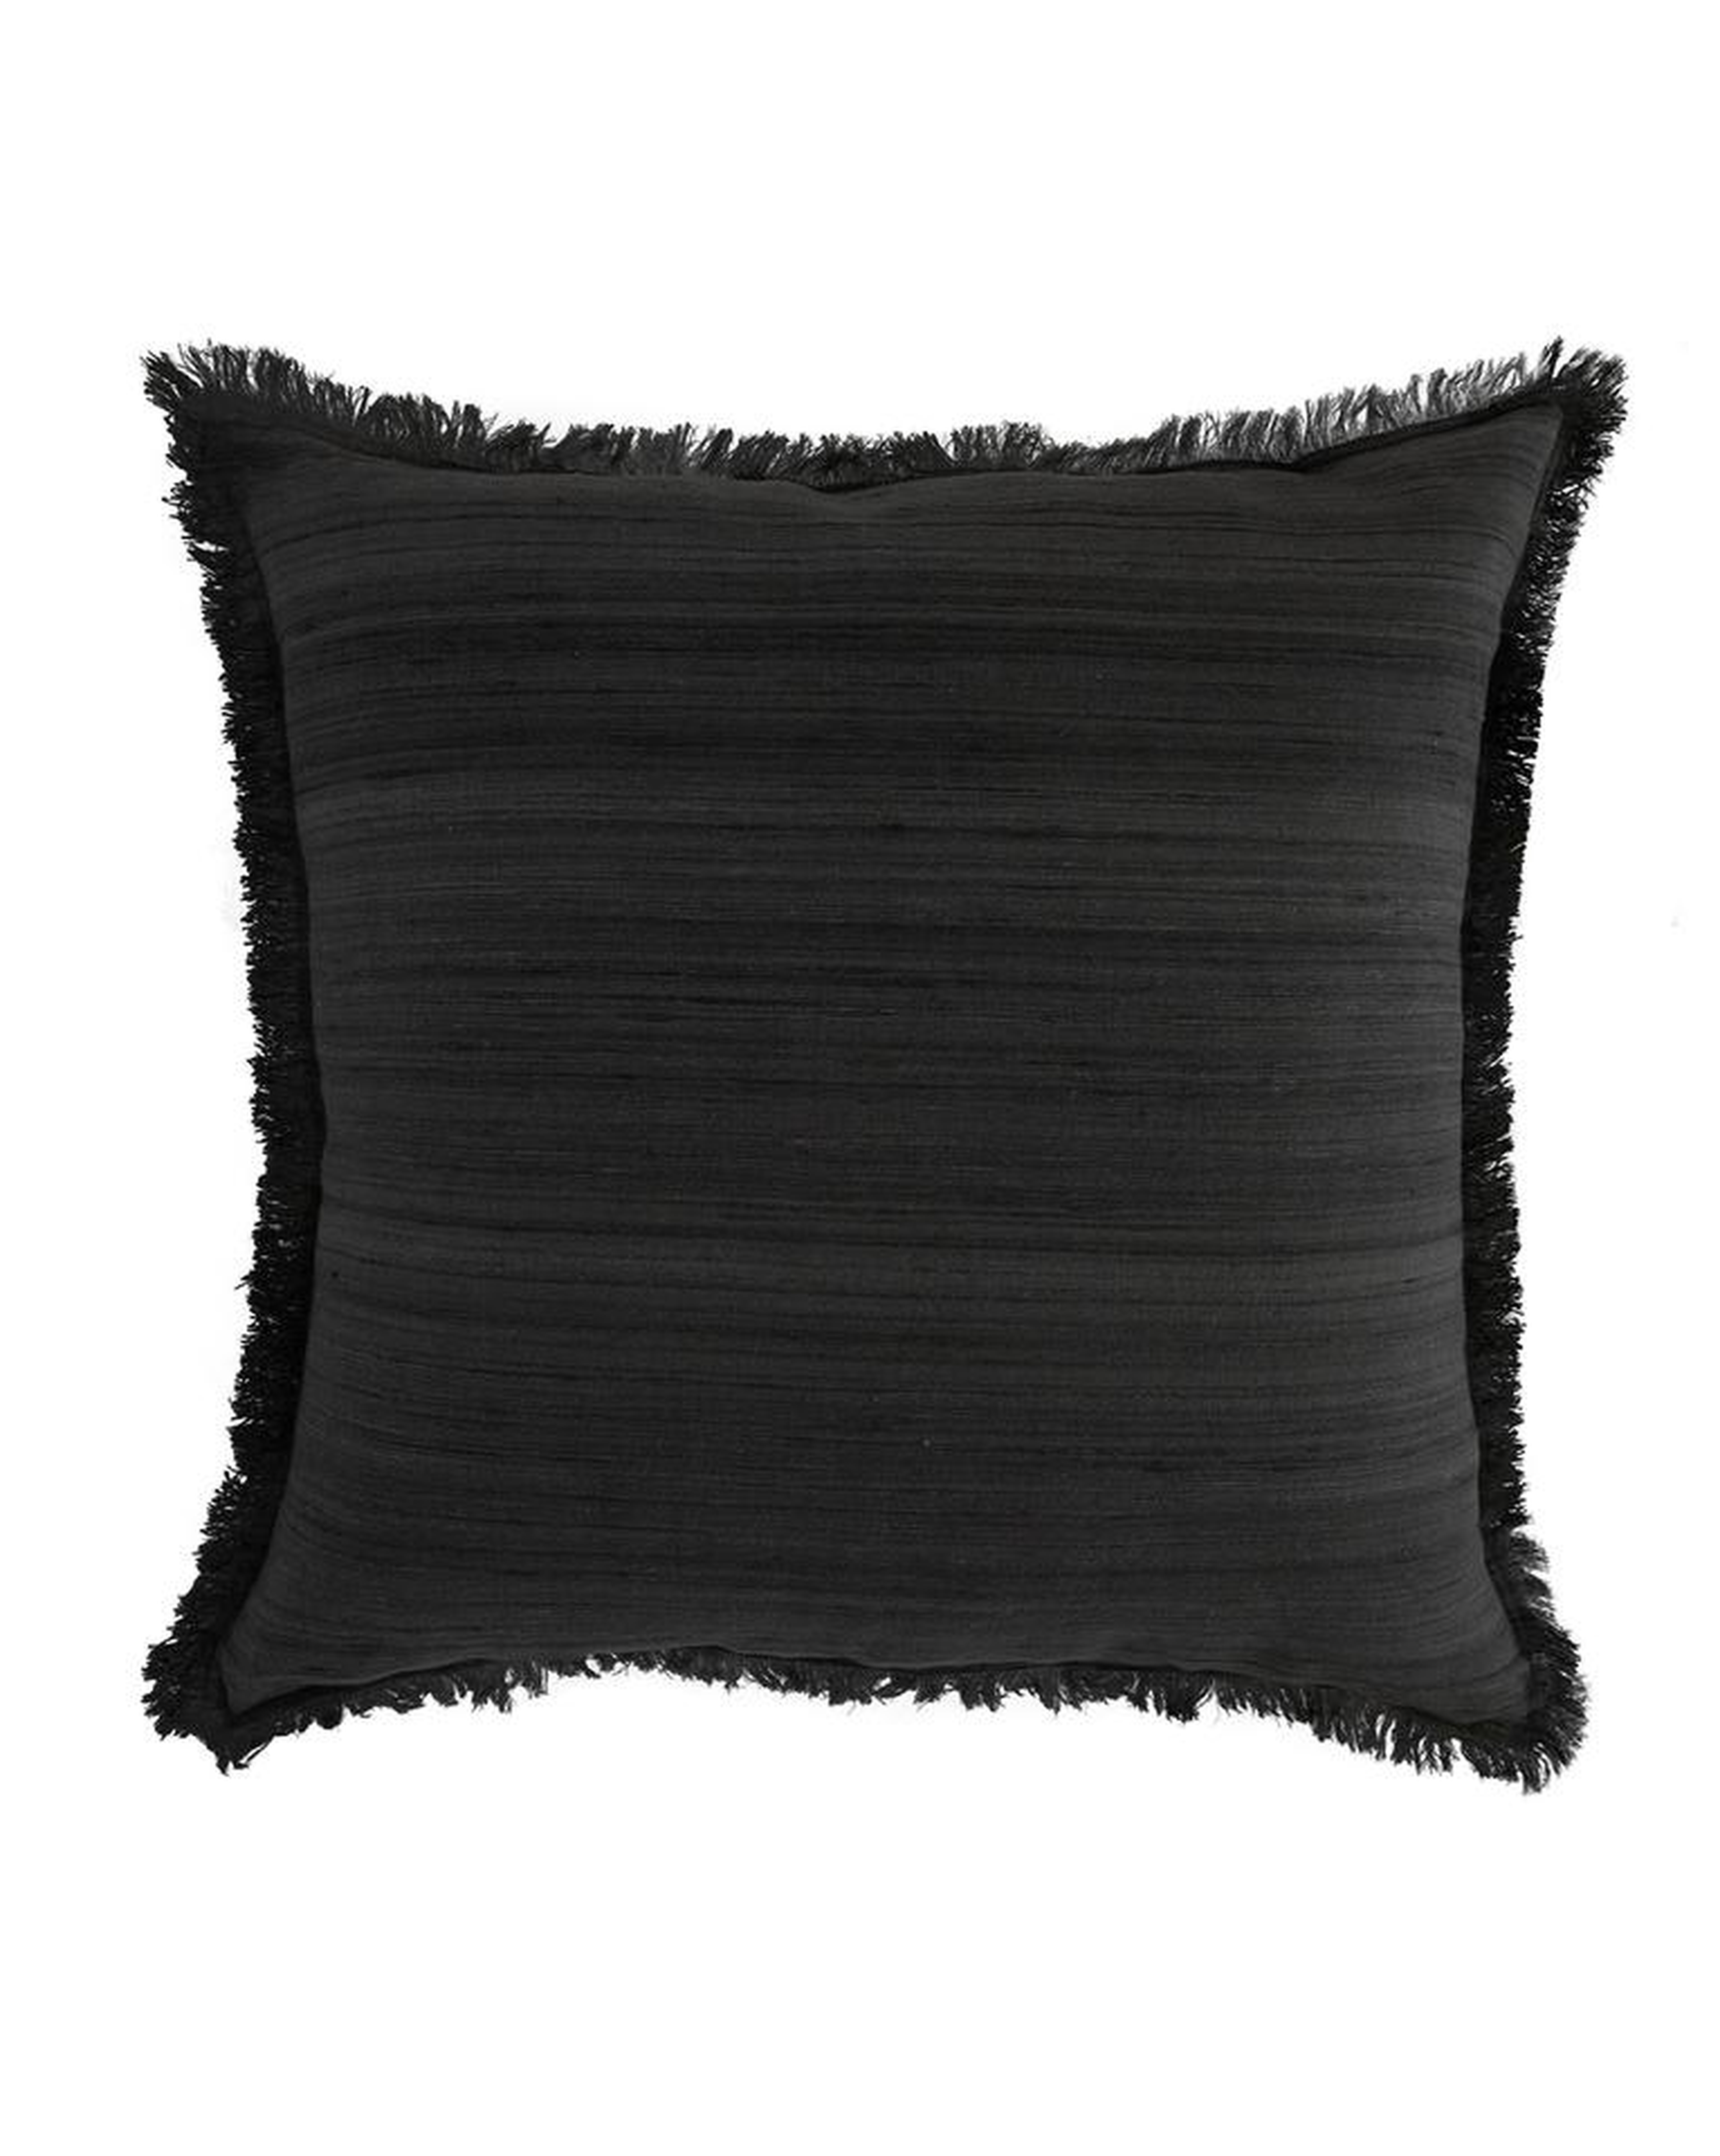 ABBEY SILK FRINGE PILLOW COVER - McGee & Co.